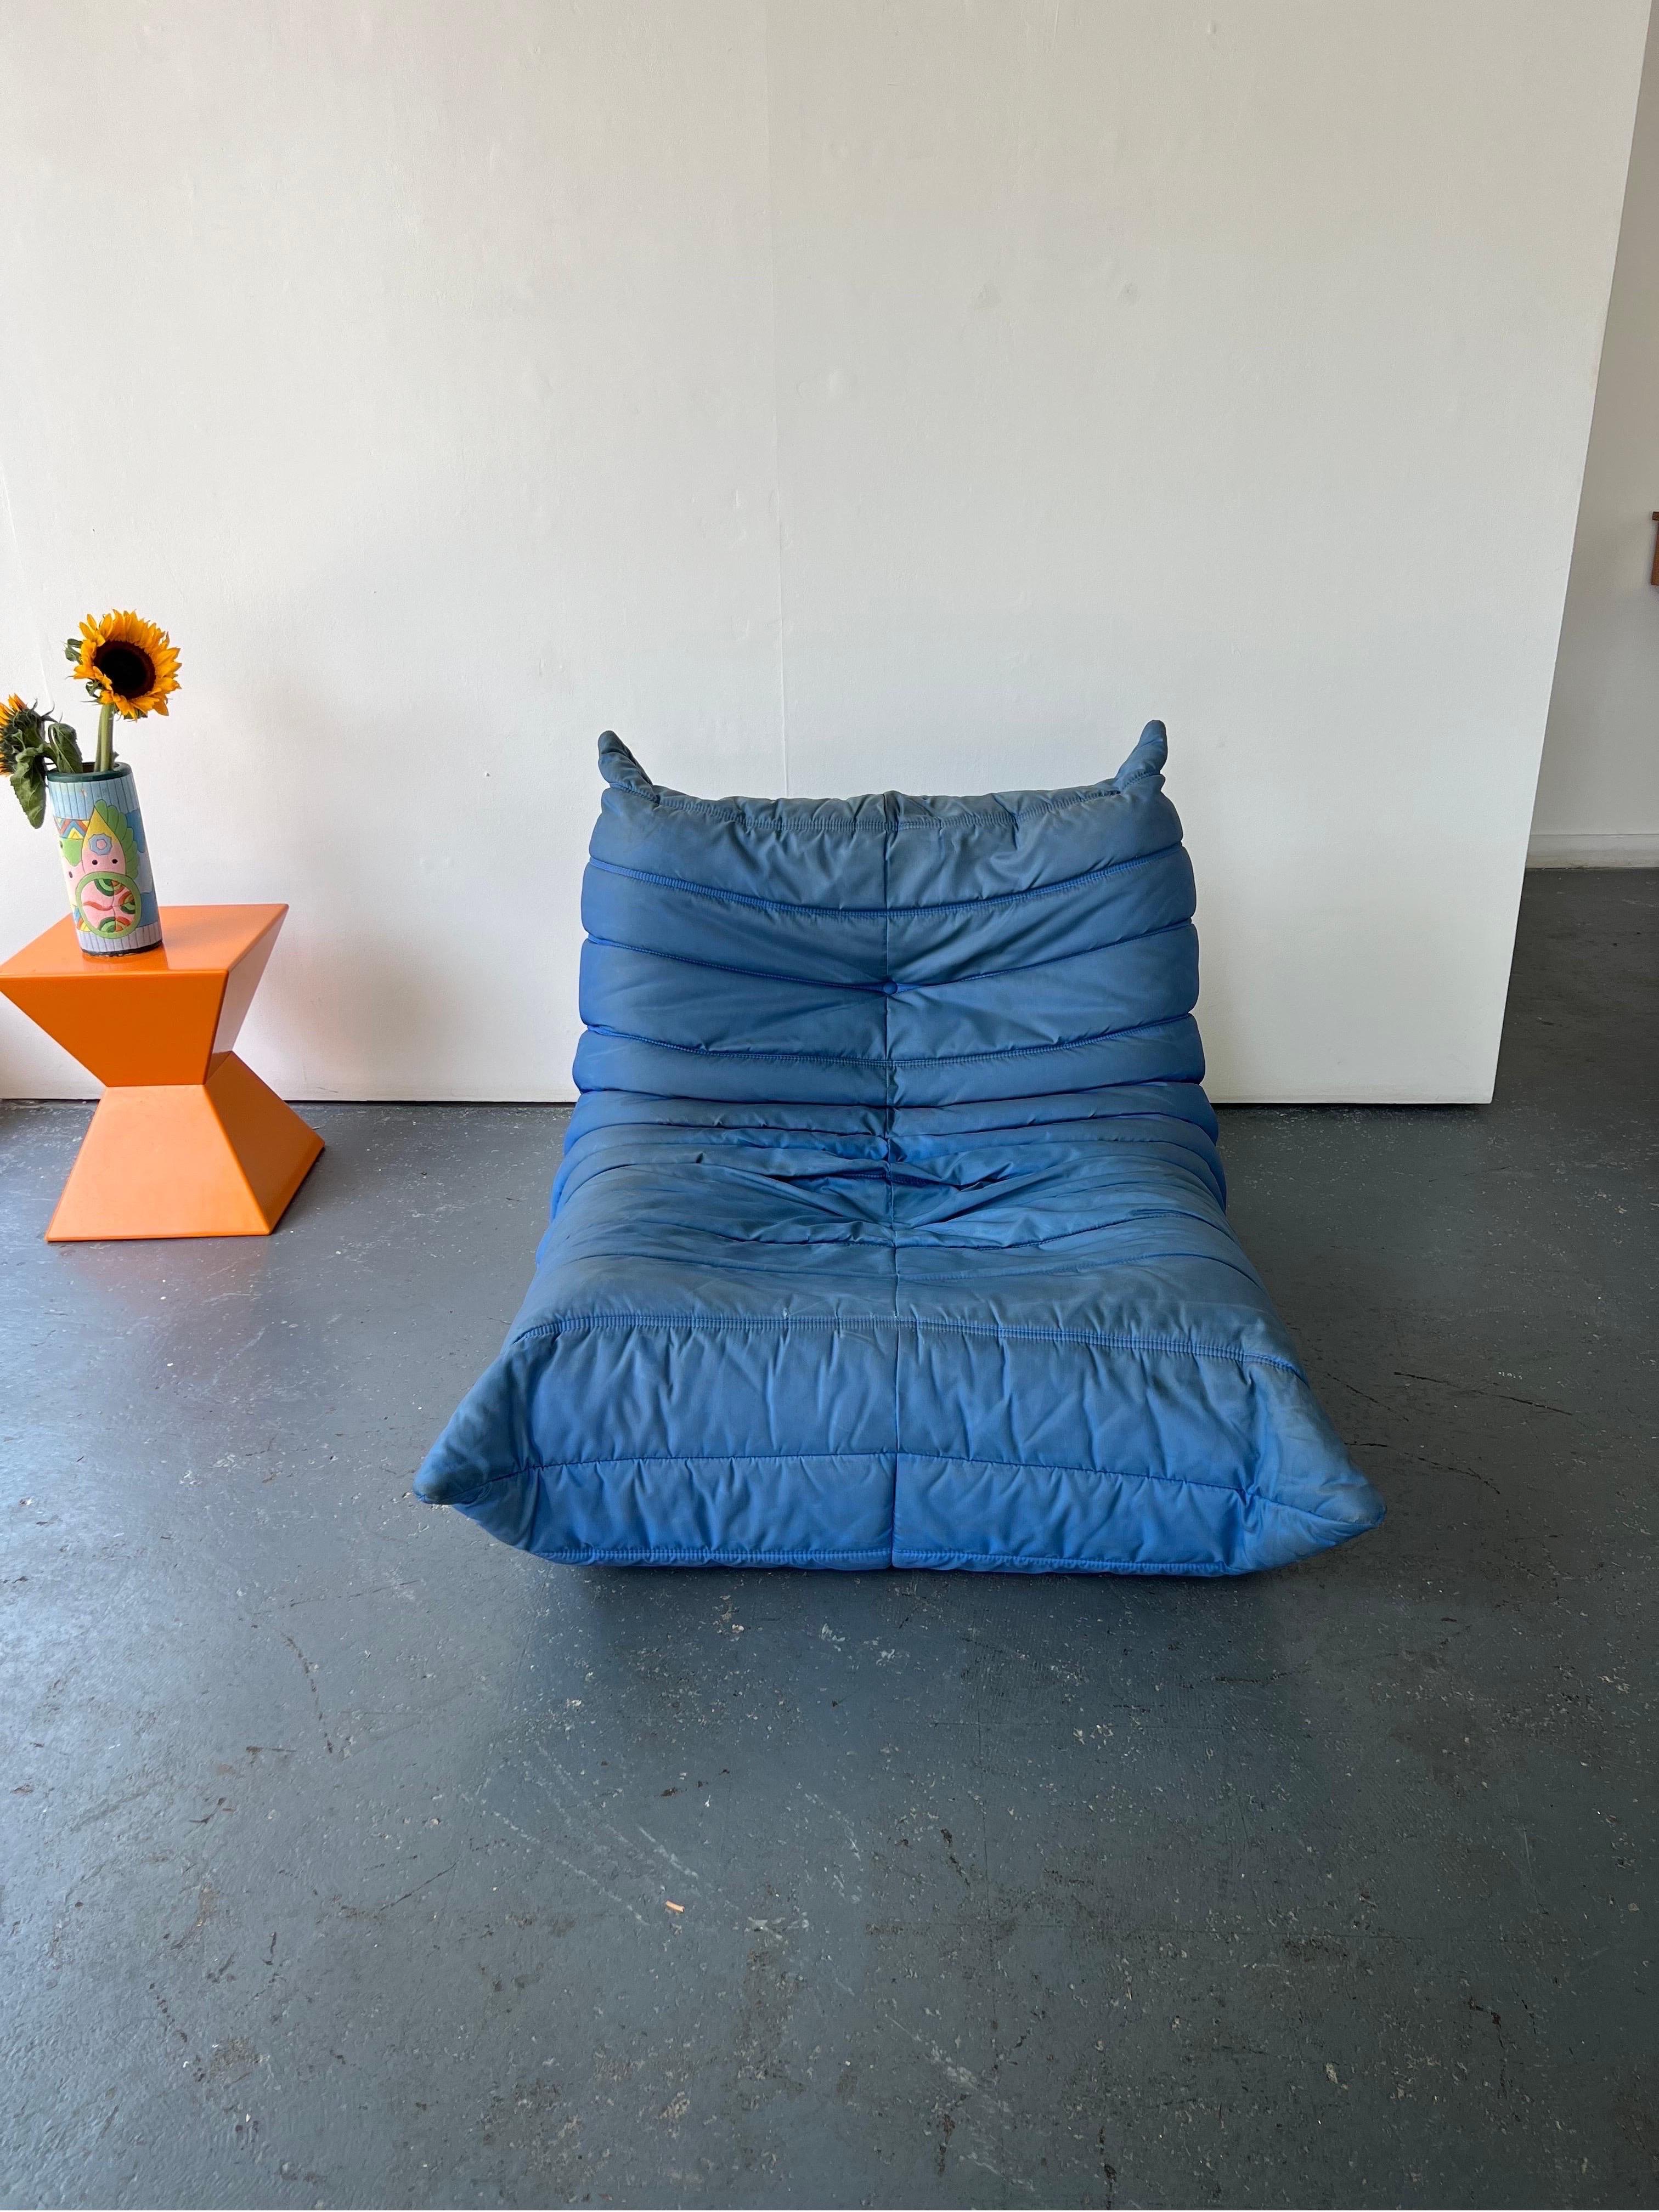 Fabulous blue Nylon fireside single Togo sofa by Michael Ducaroy for Ligne Roset. A comfortable and classic design in a super rare cover. The Nylon is a very contemporary finish. 

100% authentic with the stripe pattern underneath and Ligne Roset